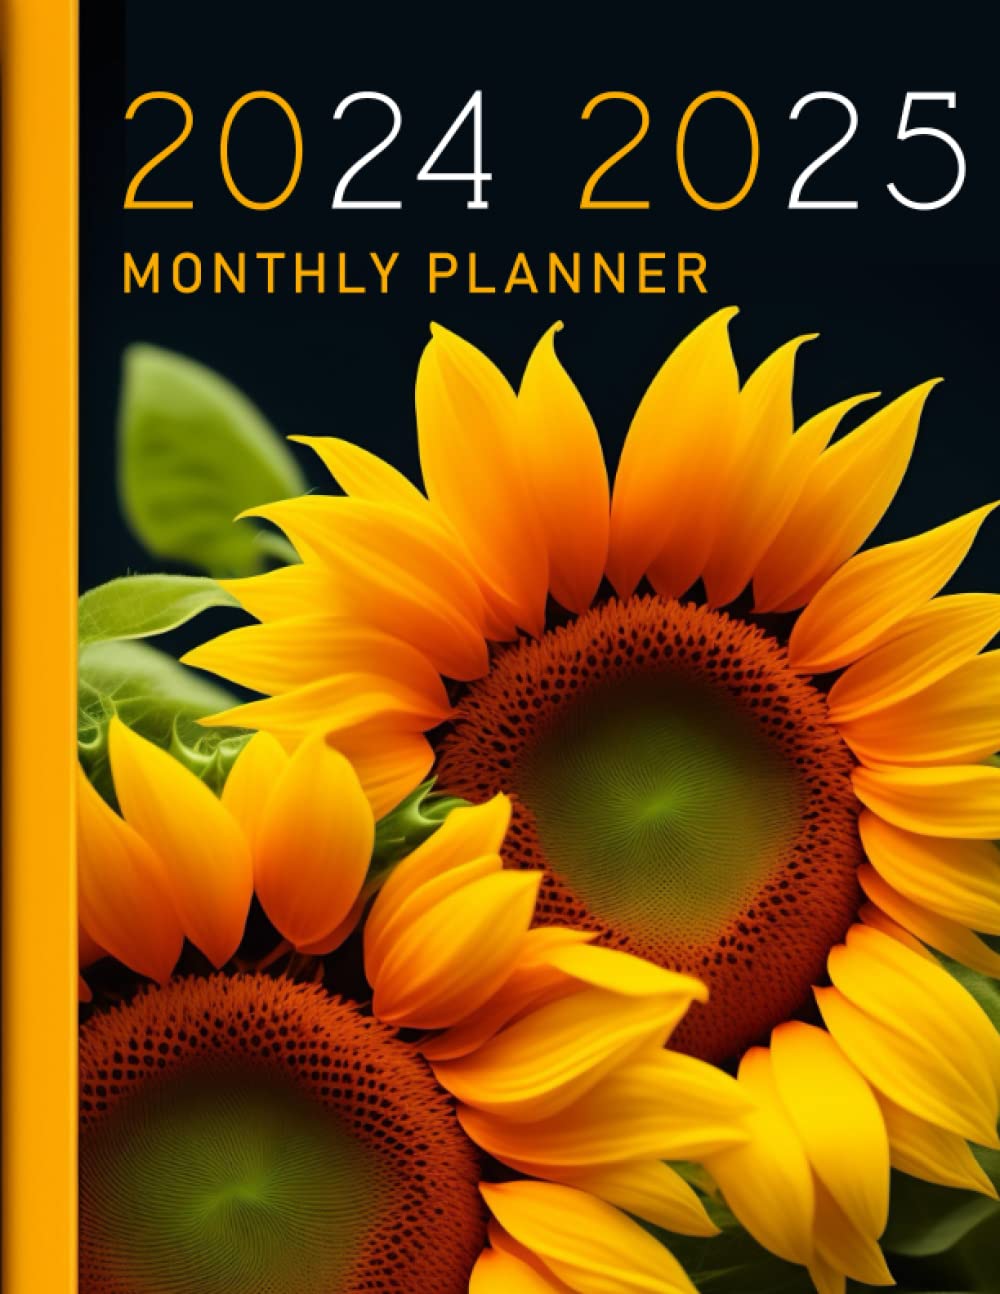 2024-2025 Monthly Planner: Get Organized in Style with Our Large Sunflower Two 2 Year Agenda Organizer Diary - 24 Months Calendar